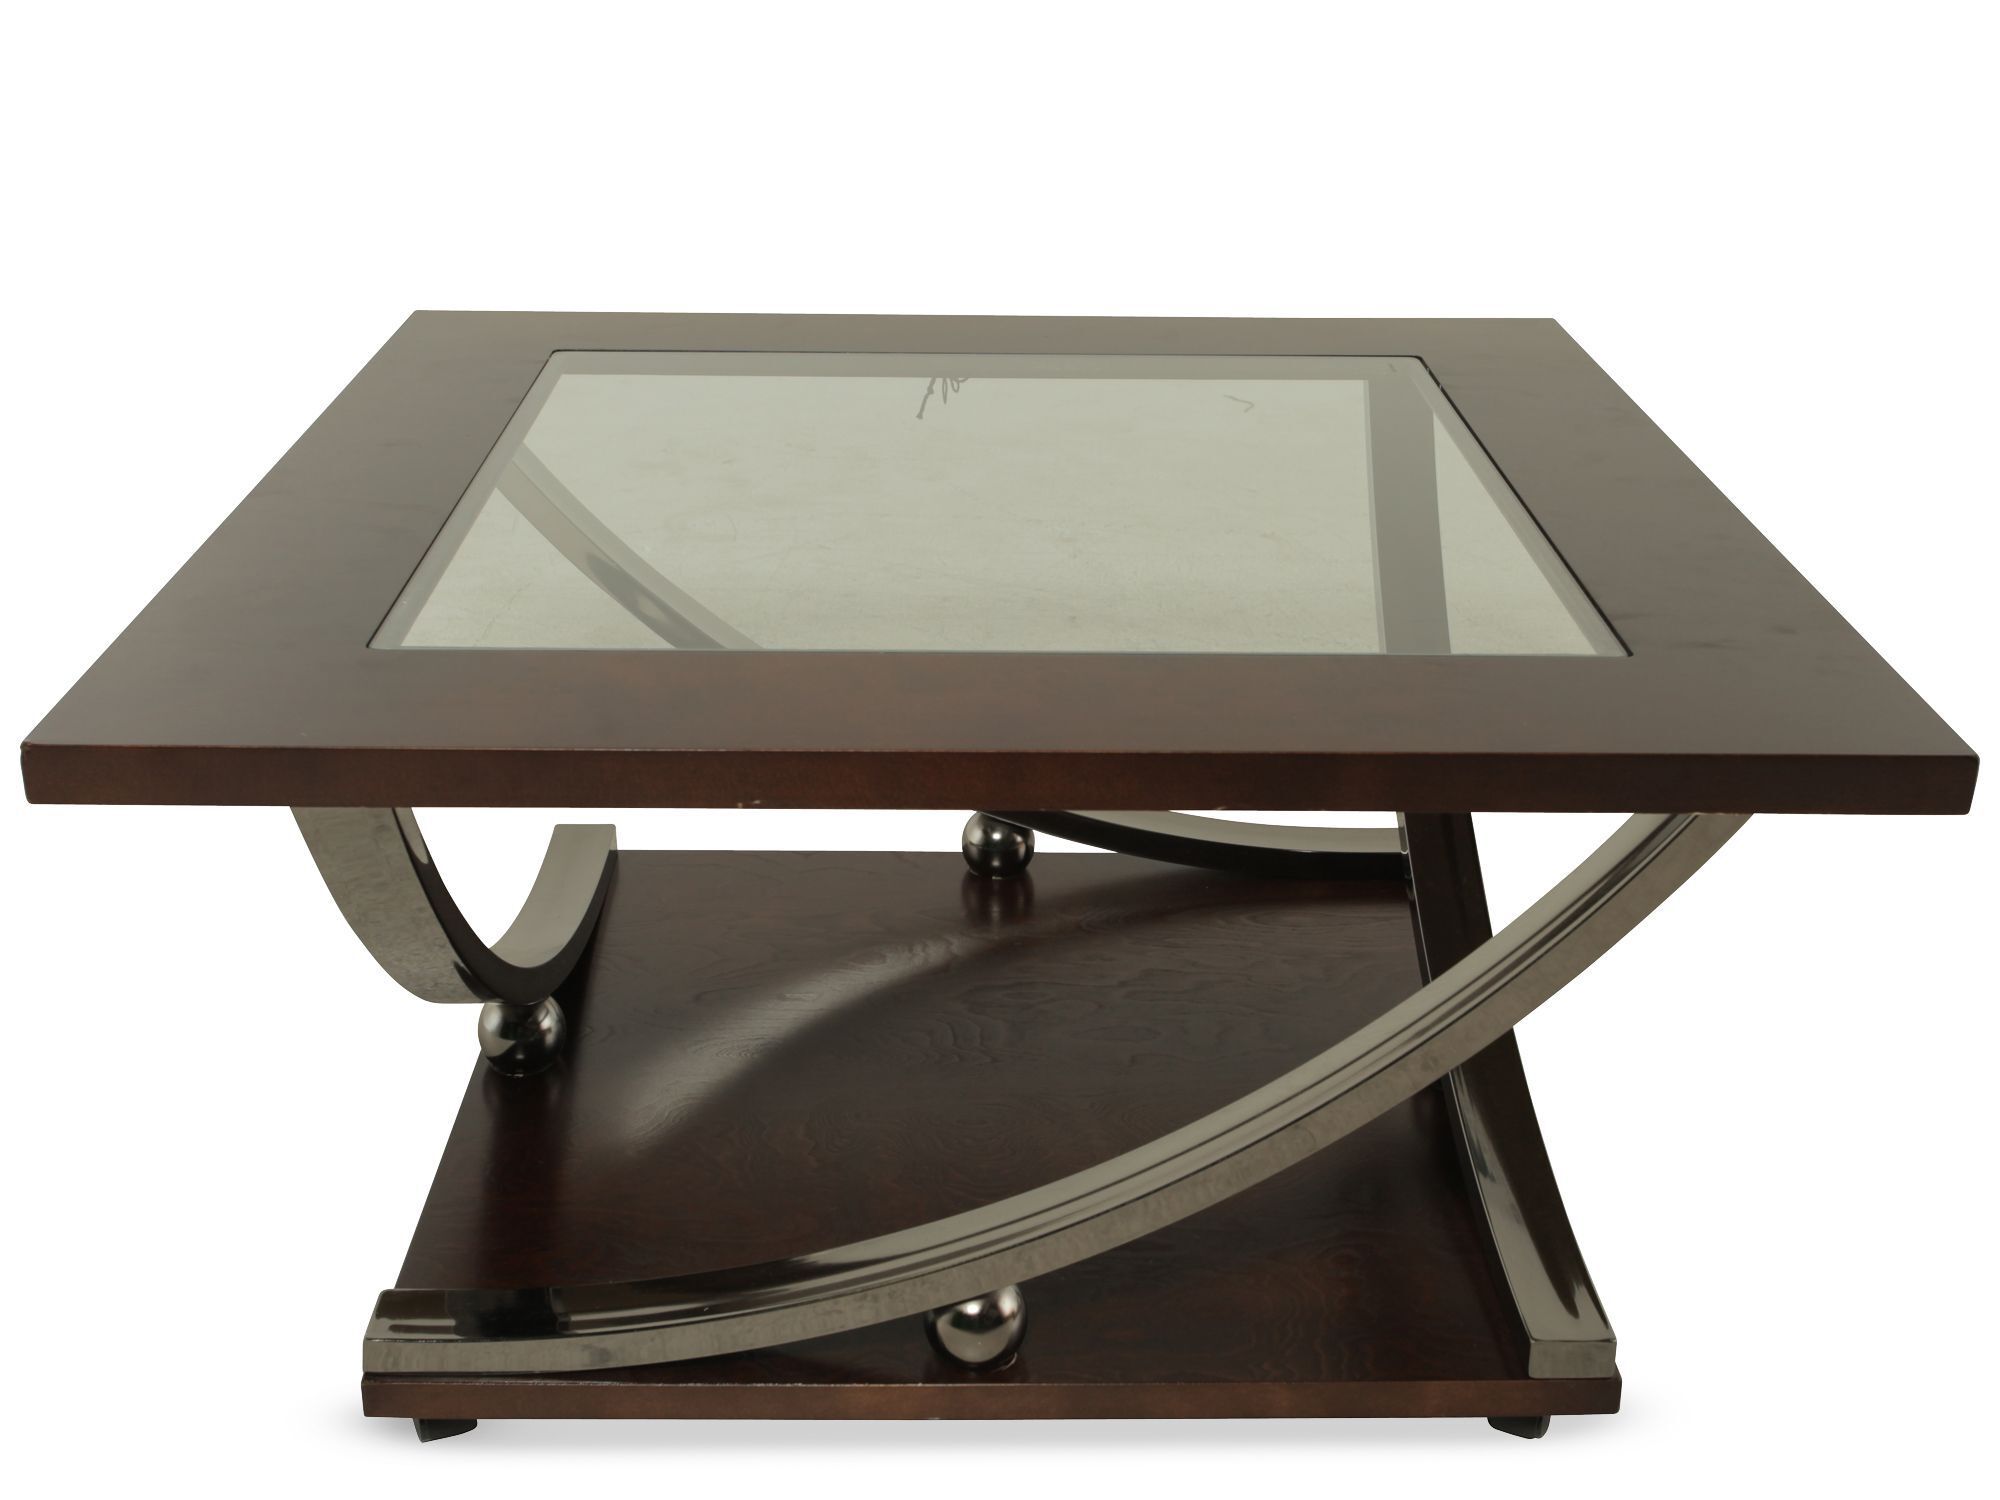 Square Contemporary Cocktail Table In Merlot | Mathis Brothers Furniture Throughout Hassch Modern Square Cocktail Tables (Gallery 9 of 20)